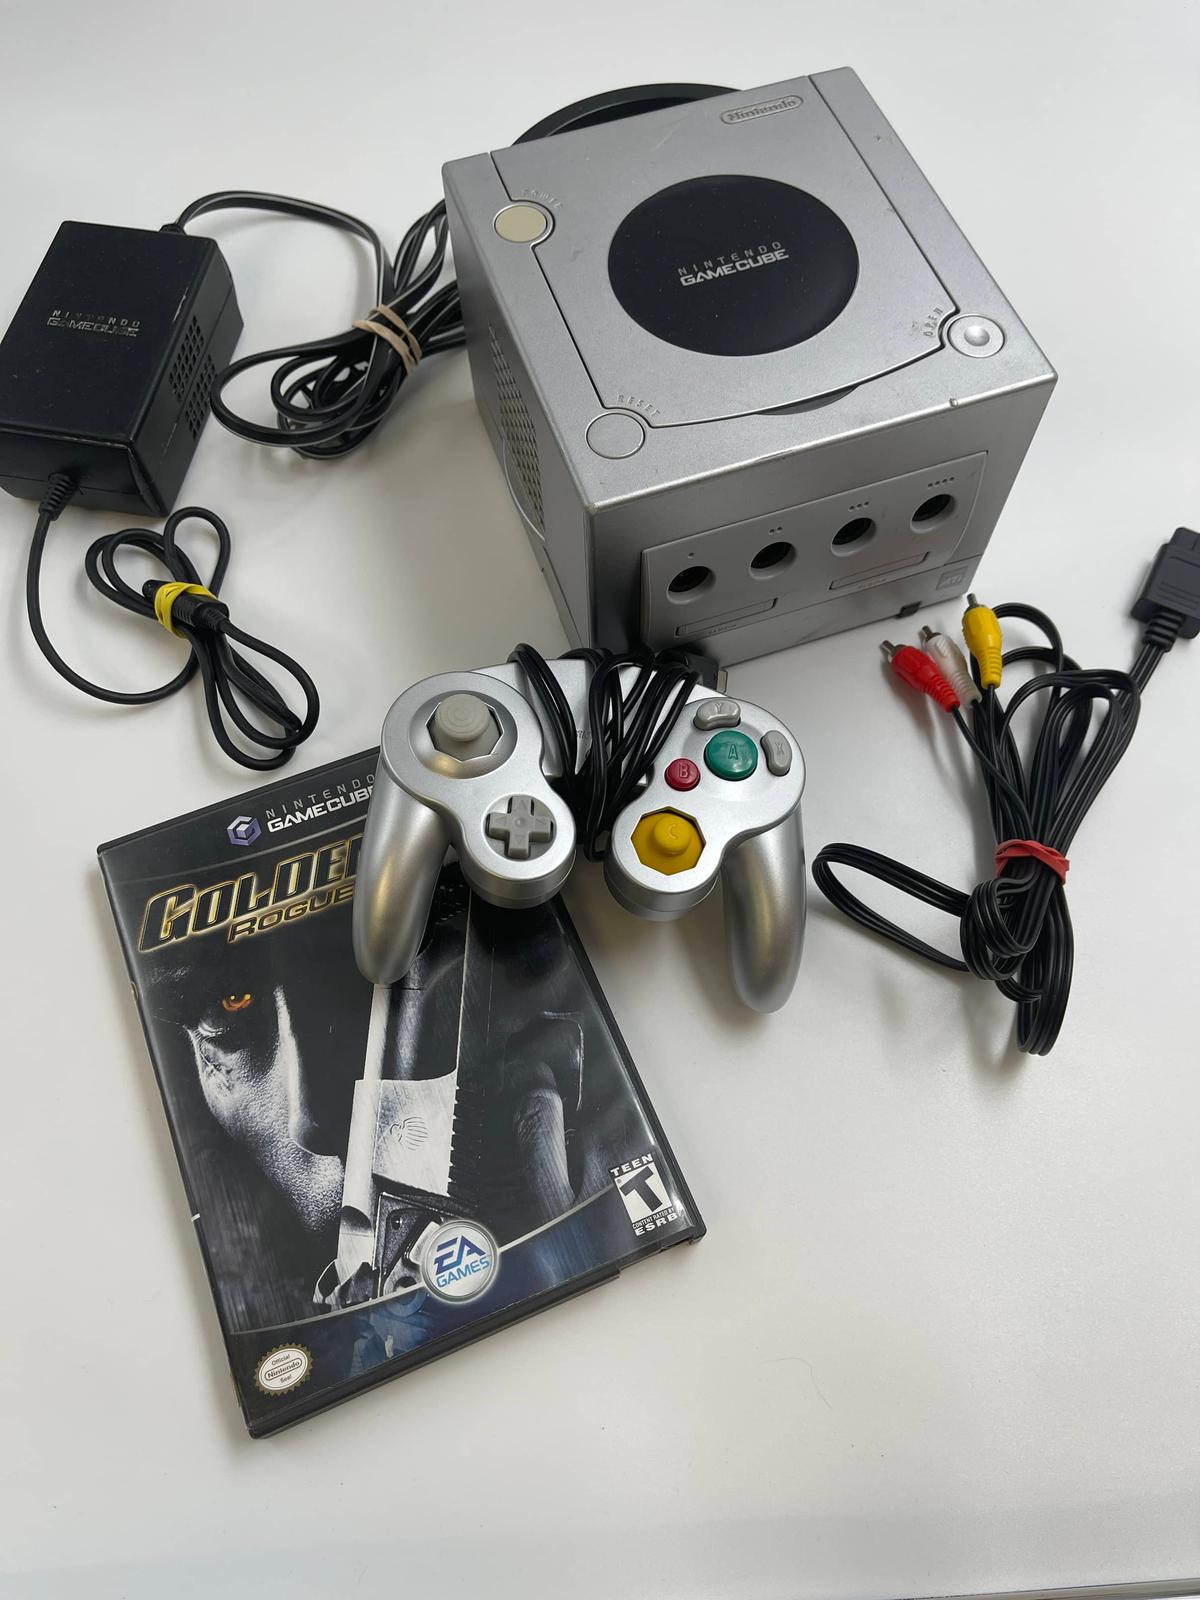 Classic Nintendo Gamecube Works Great With Cords, 1 Controller and Goldeneye Rogue Agent Game